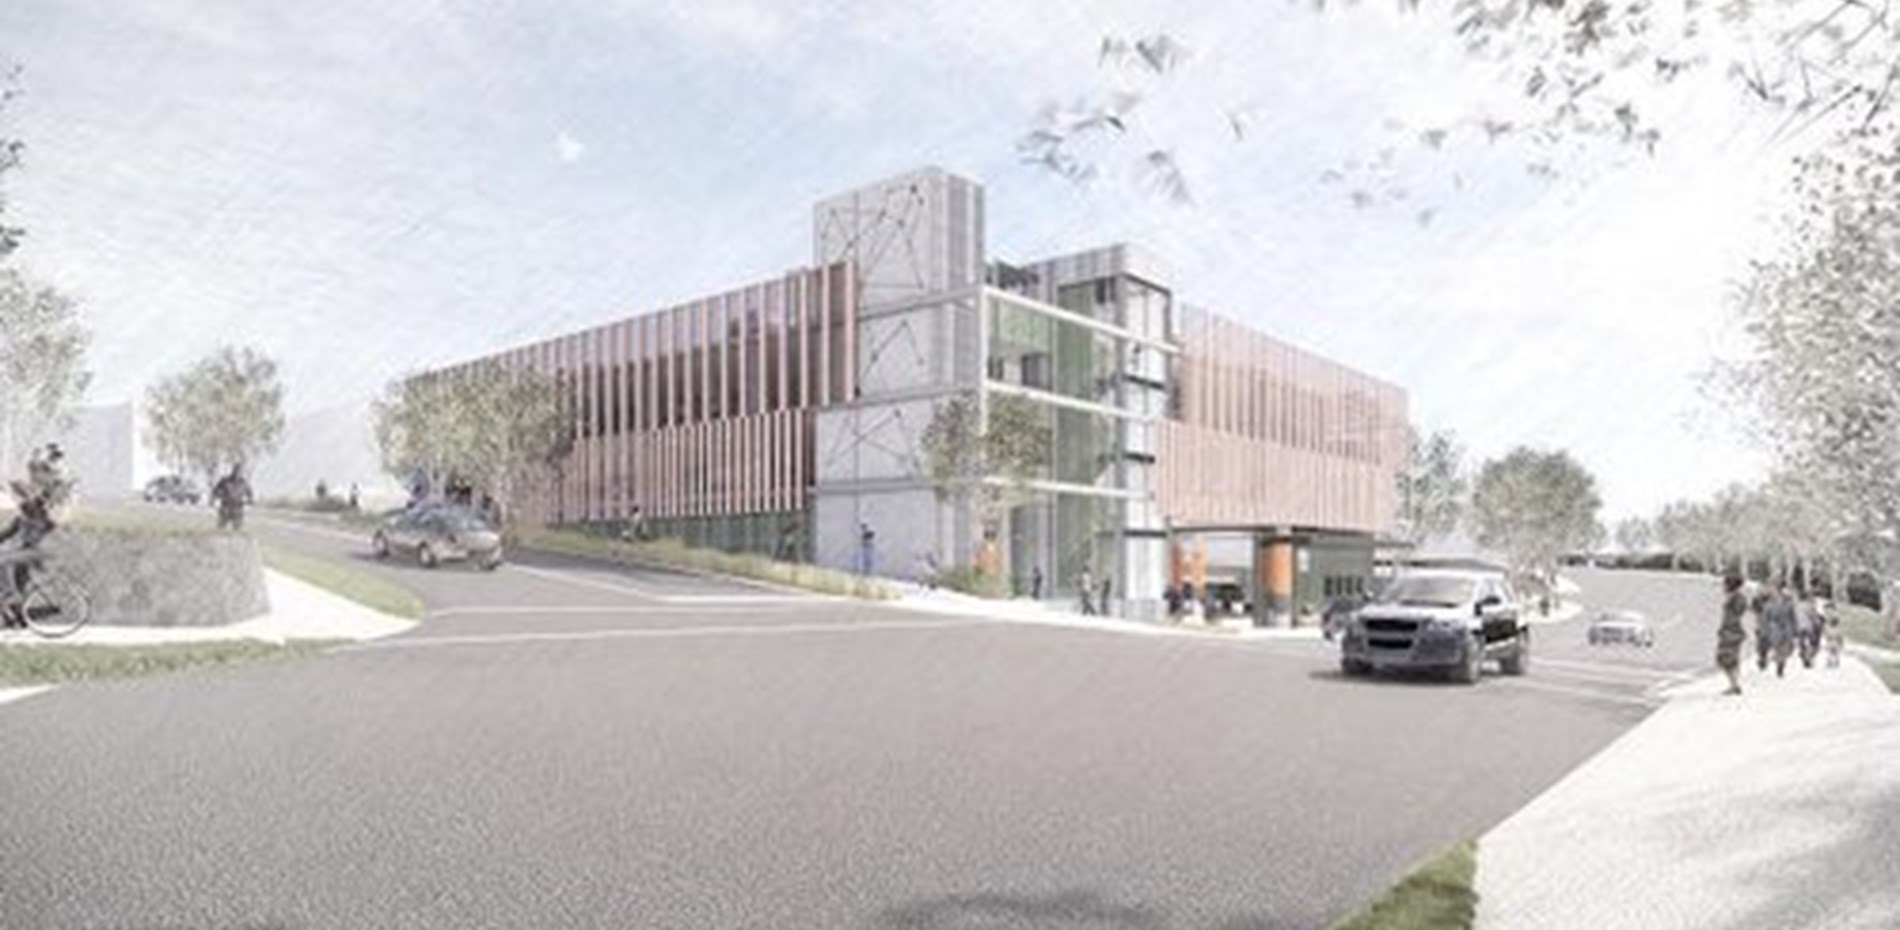 100 New Car Spaces for Greensborough Commuters  Main Image